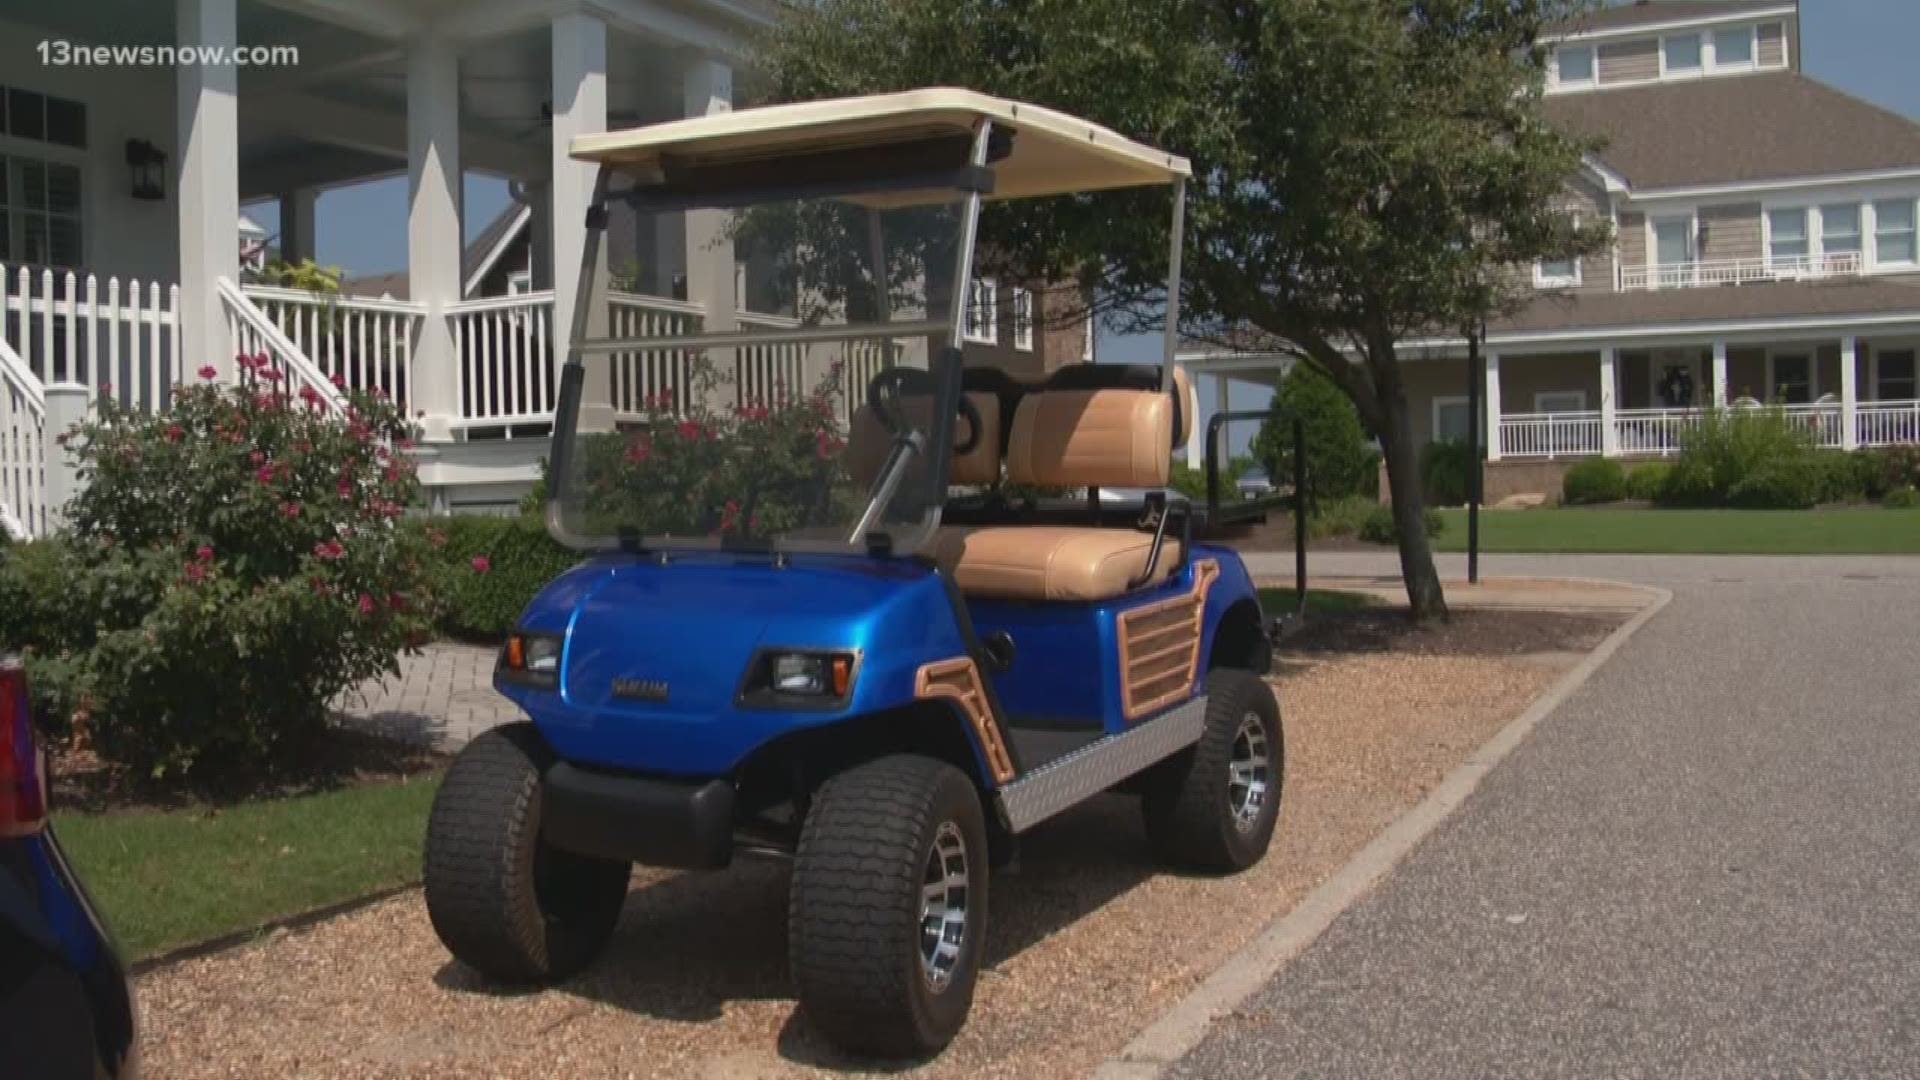 The Norfolk City Council are set to vote on an ordinance that would allow golf carts in Ocean View